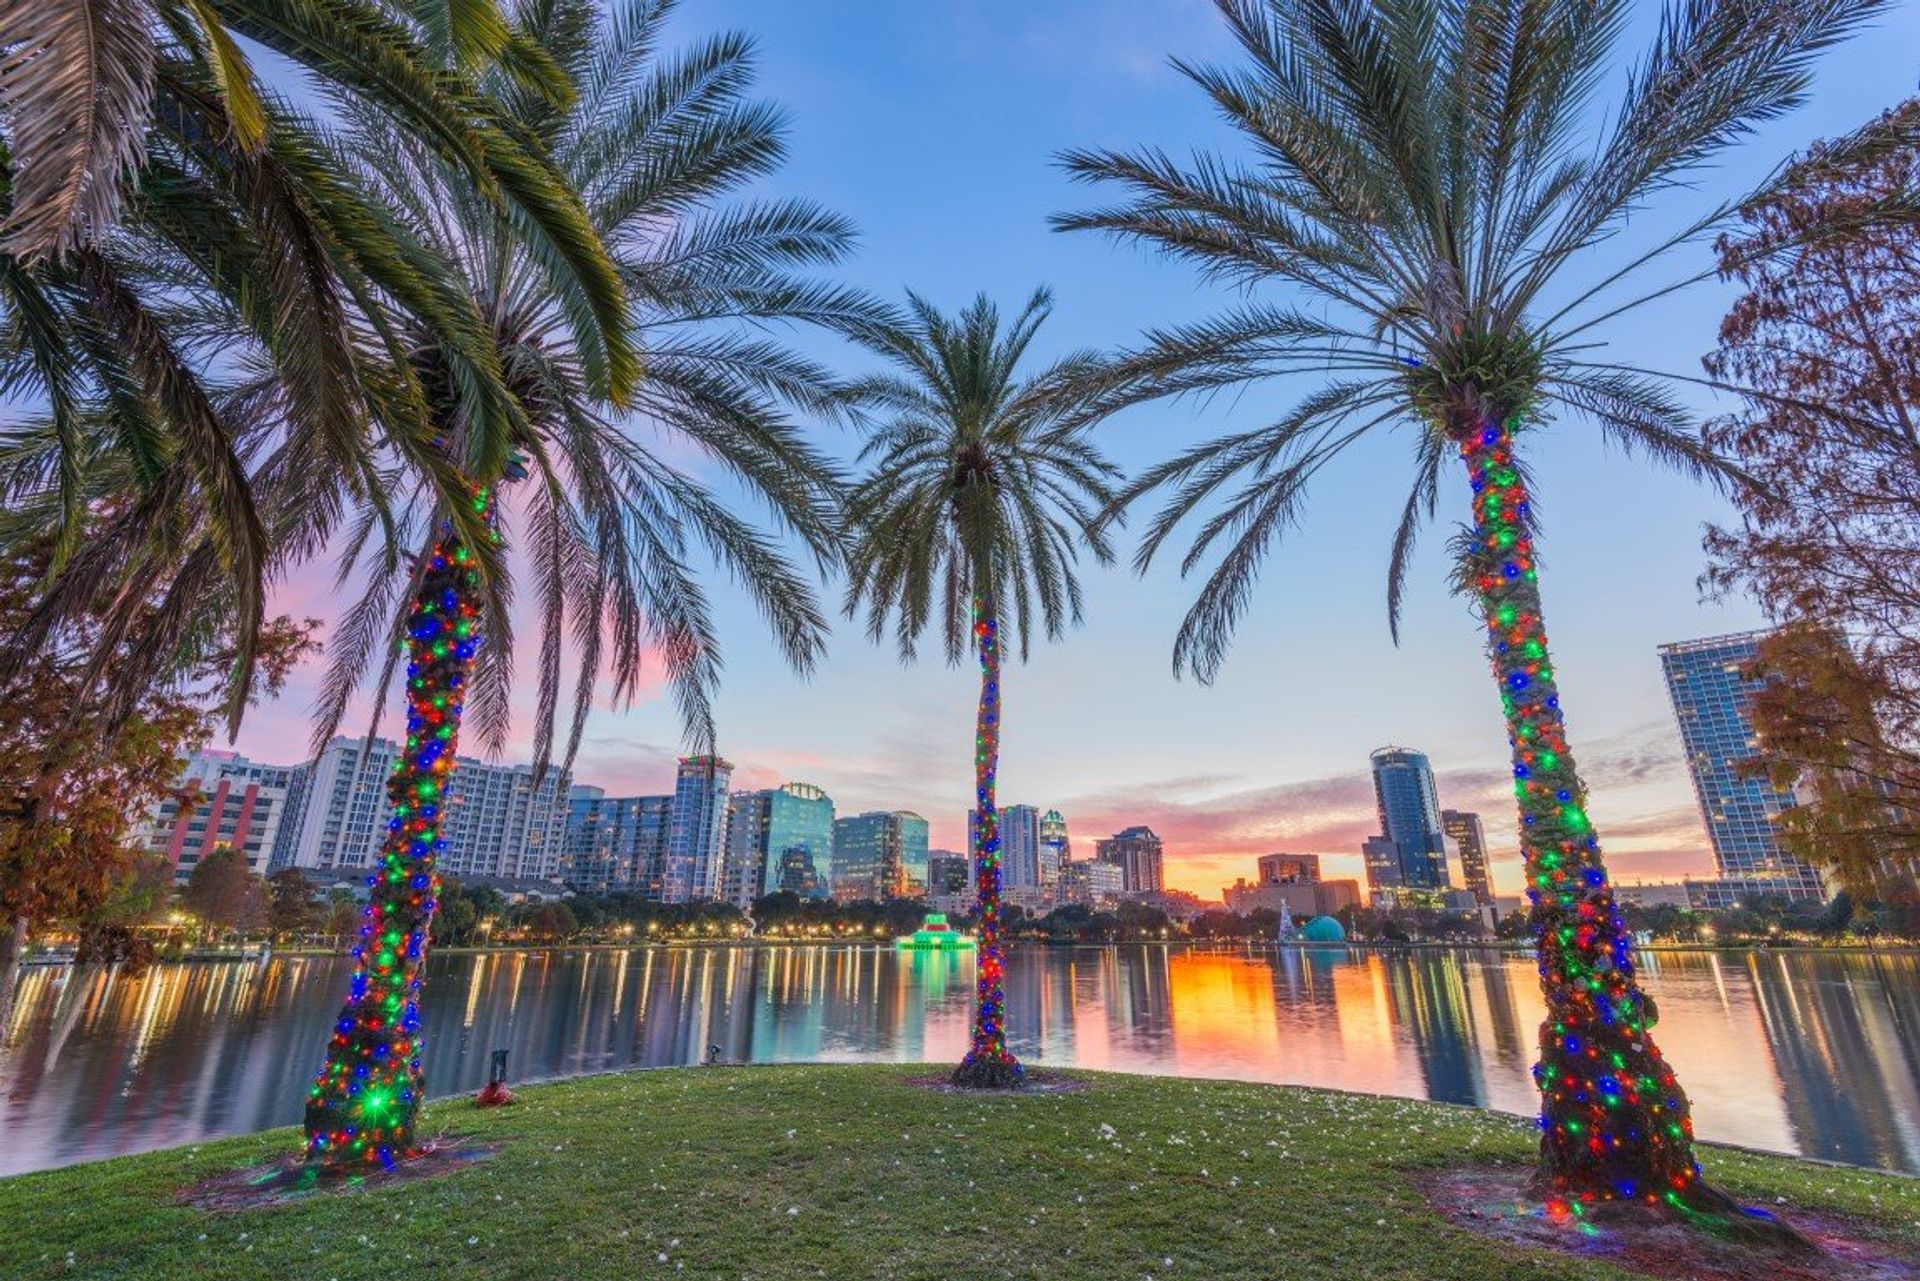 Make sure to visit Eola Park in Downtown Orlando, with its amphitheatre and fountain